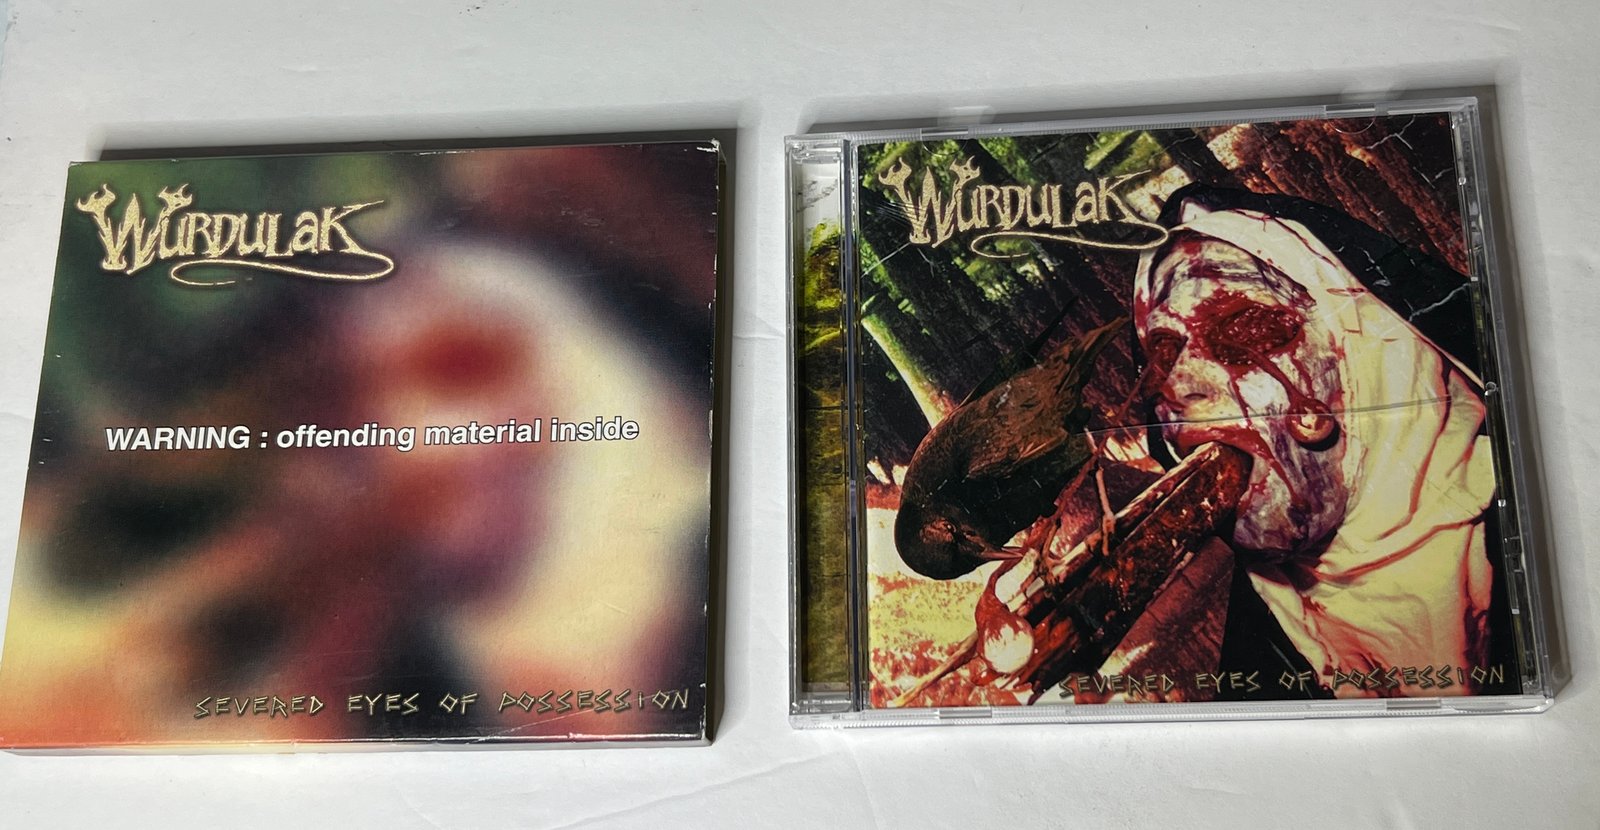 WURDULAK - Severed Eyes Of Possession - CD | B3auty4twoeverythingshop